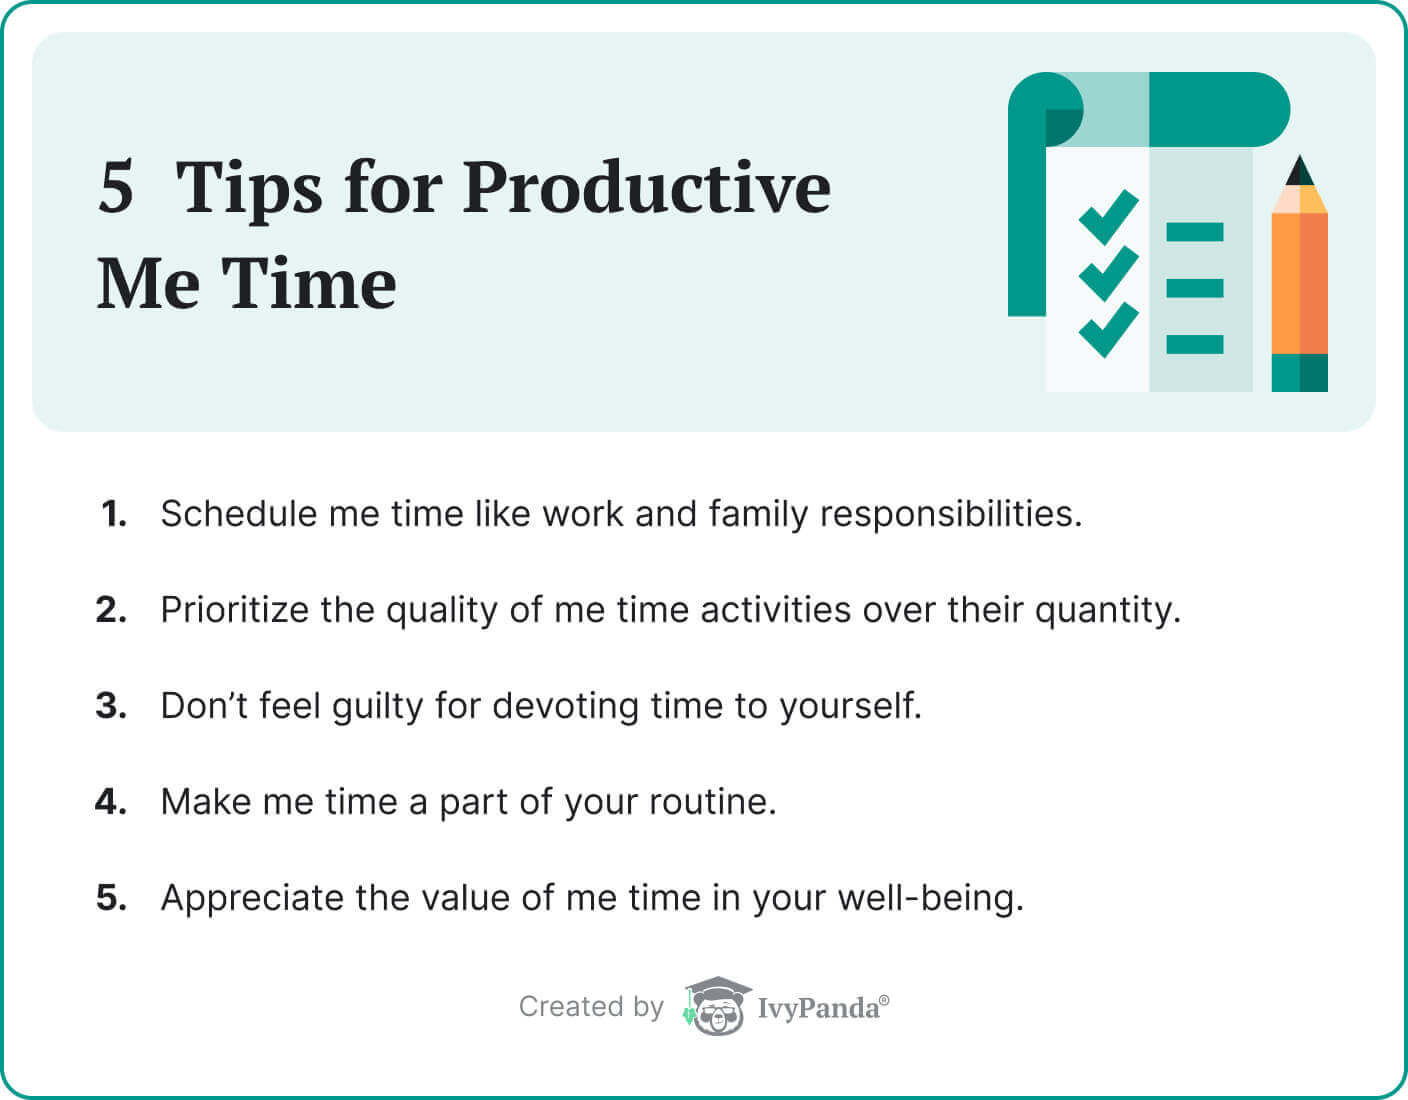 The picture lists 4 main rules for organizing me time qualitatively.